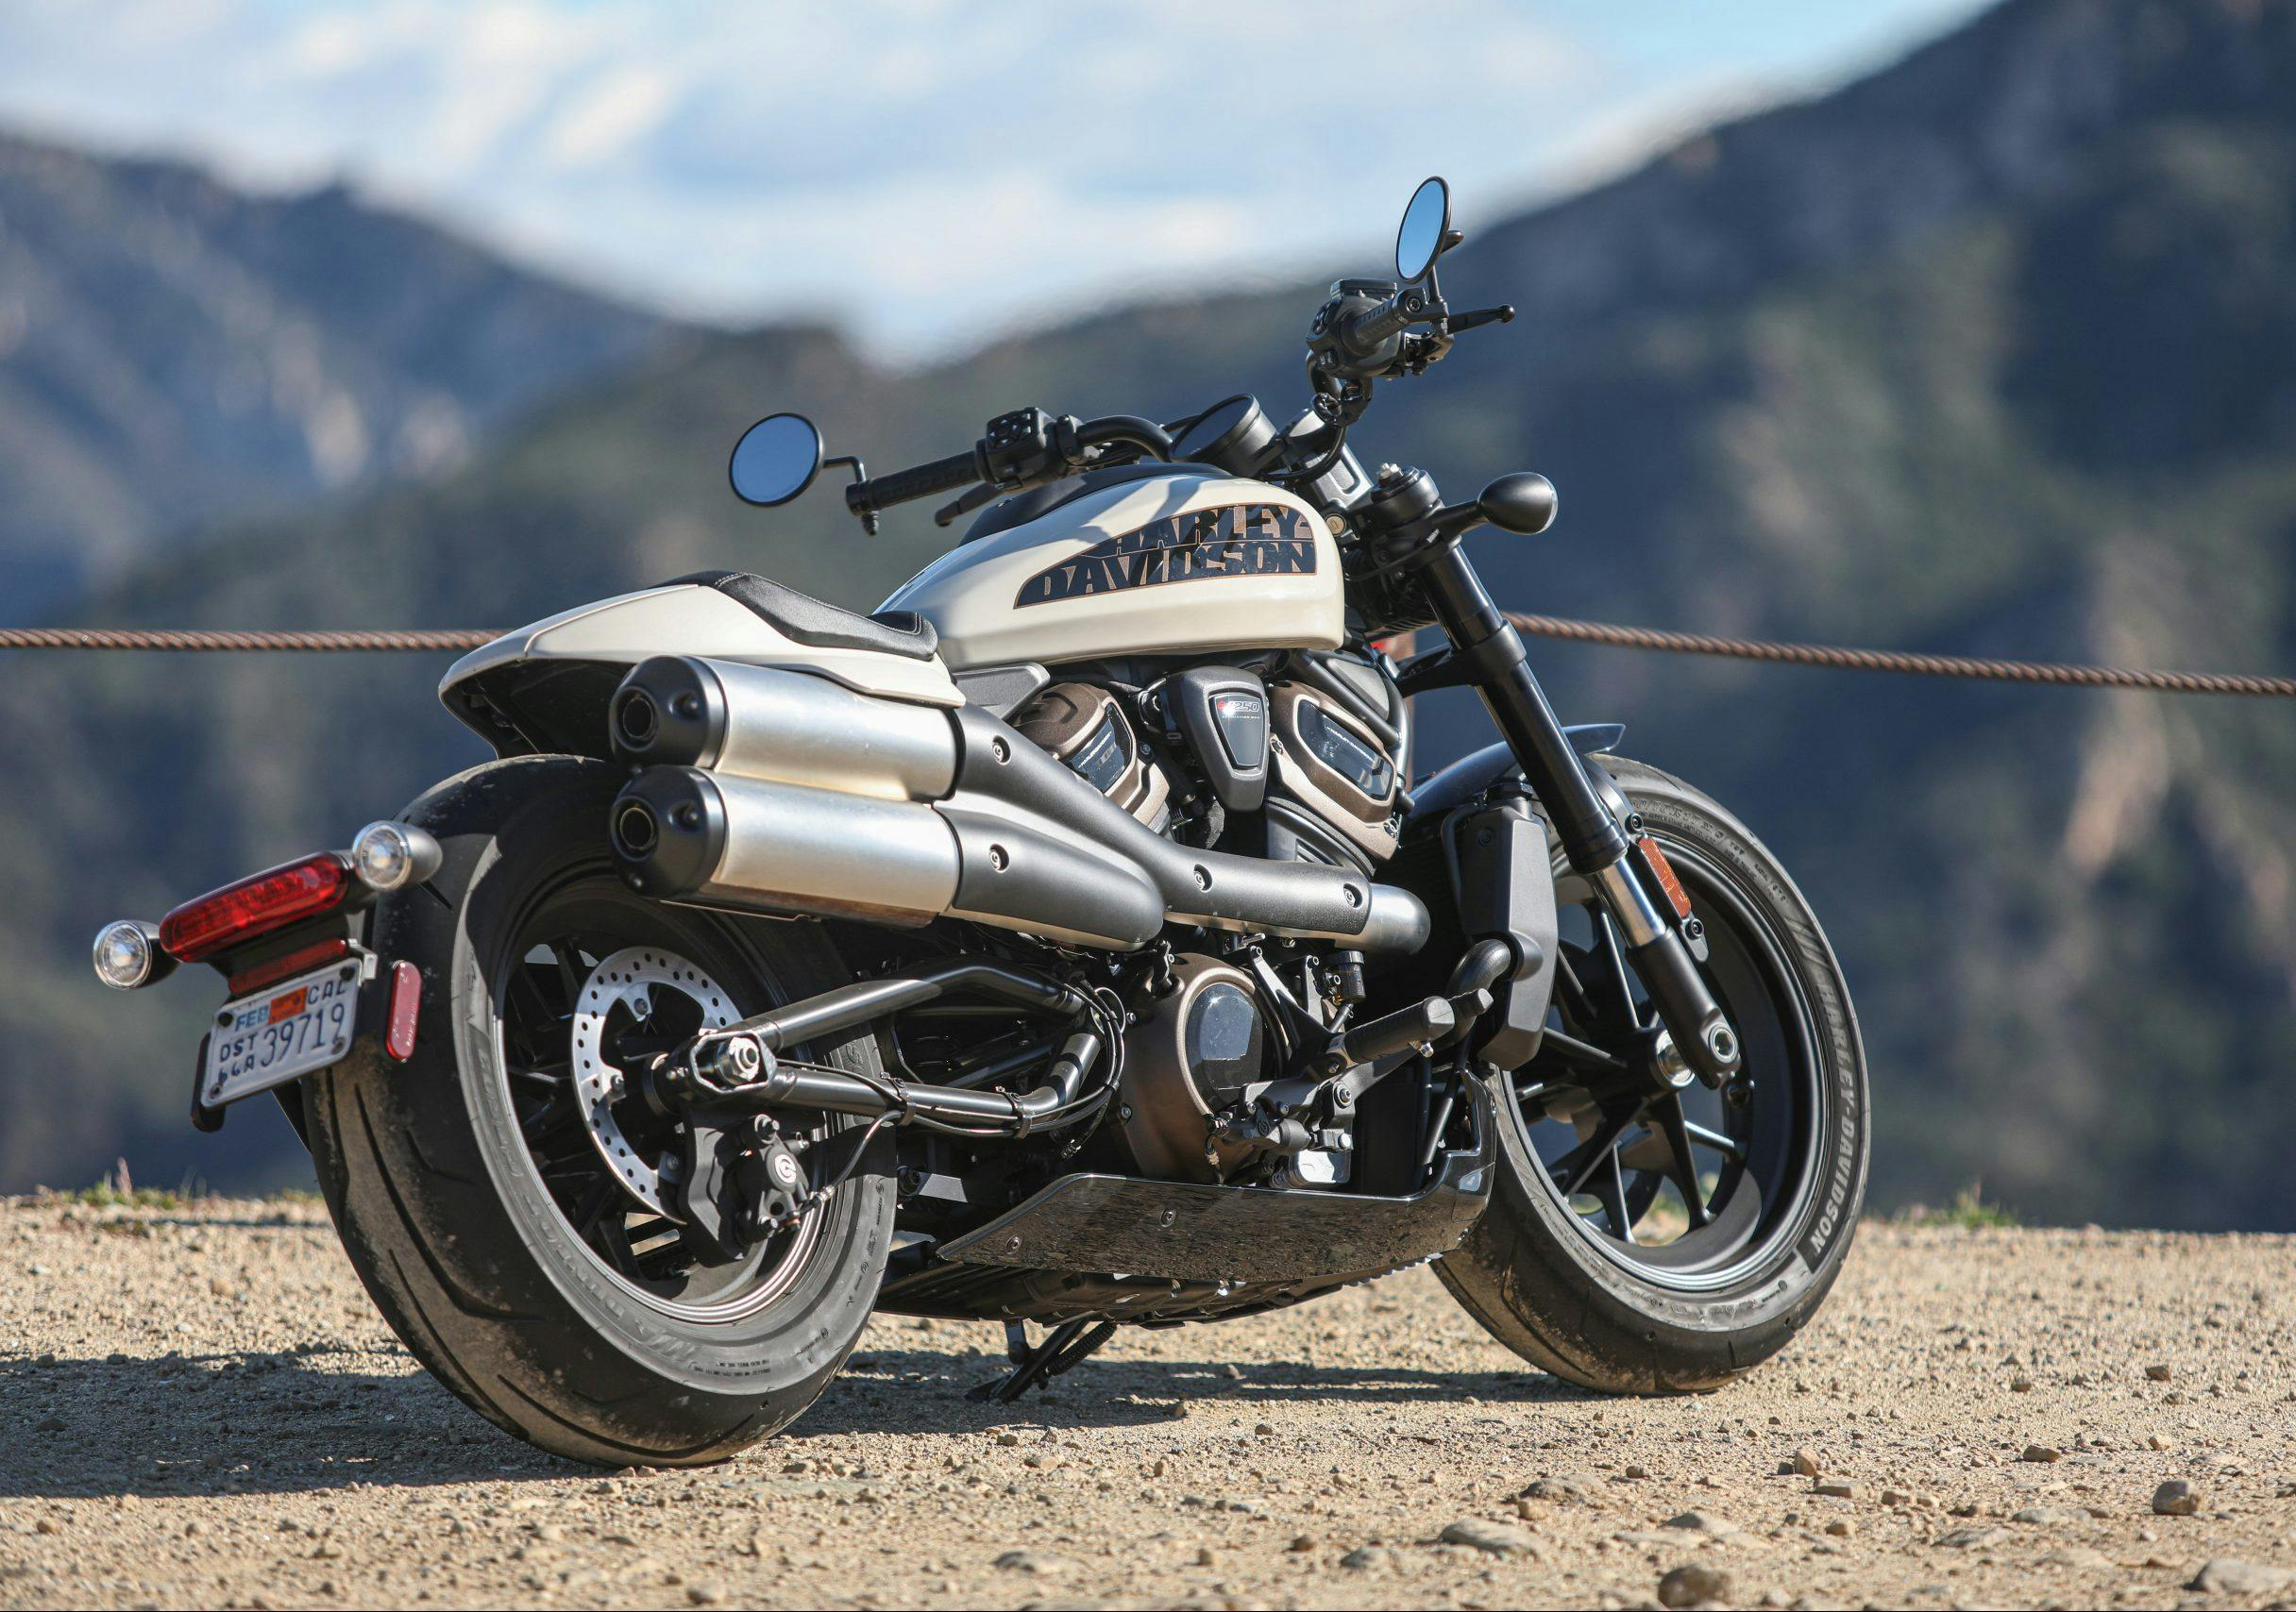 Harley-Davidson might have two all-new bikes coming, leaked